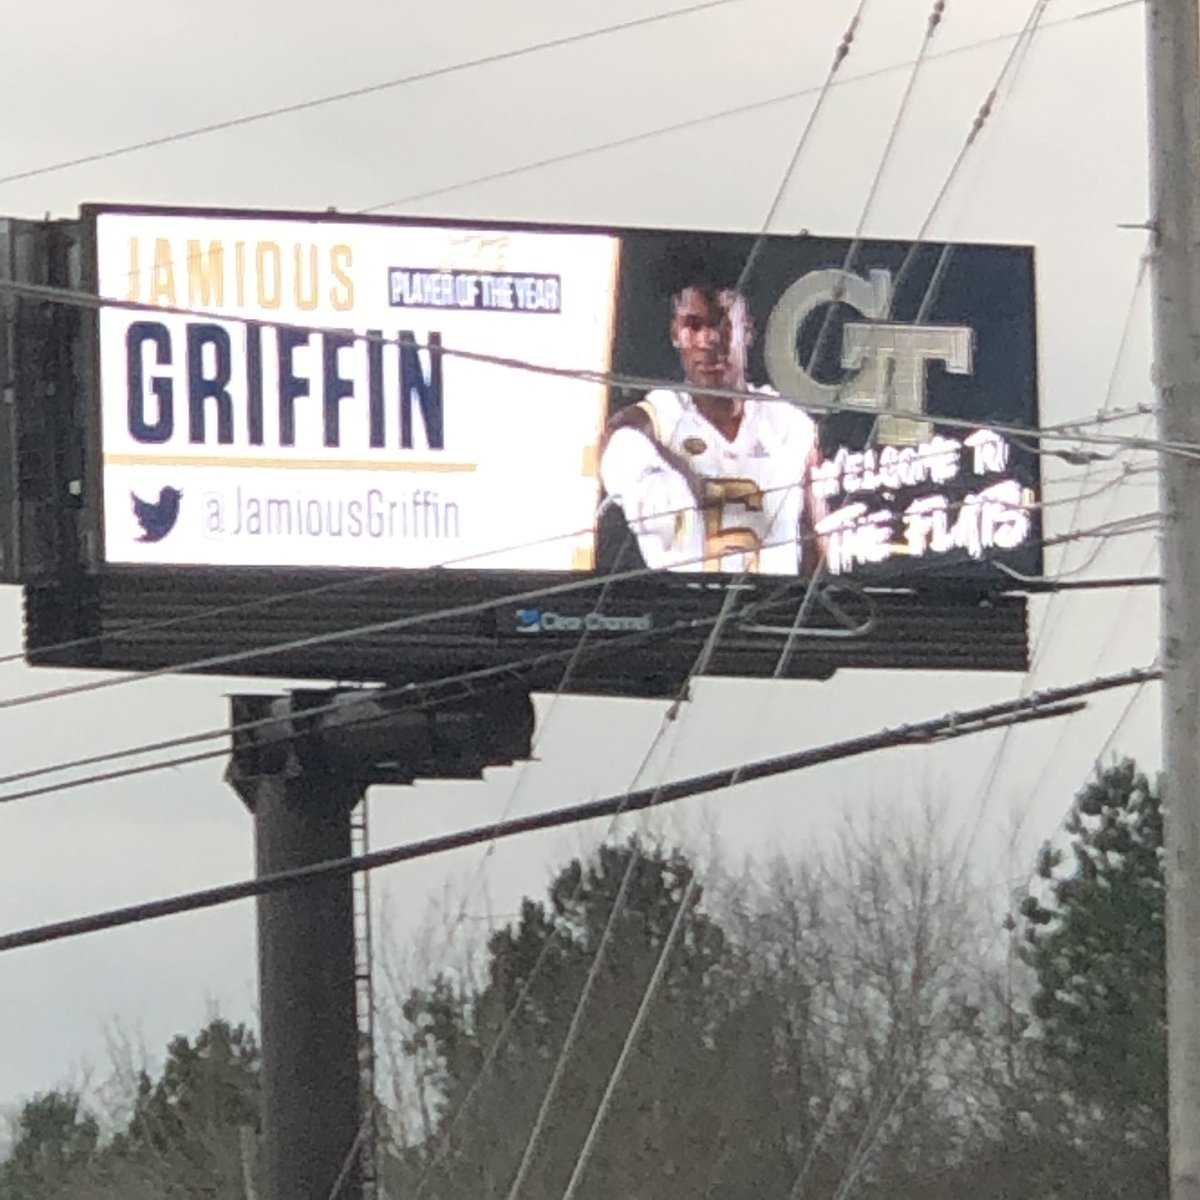 Saw this today in Metro ATL. Props to @GeorgiaTechFB fighting the good fight against that team down 316. @JamiousGriffin